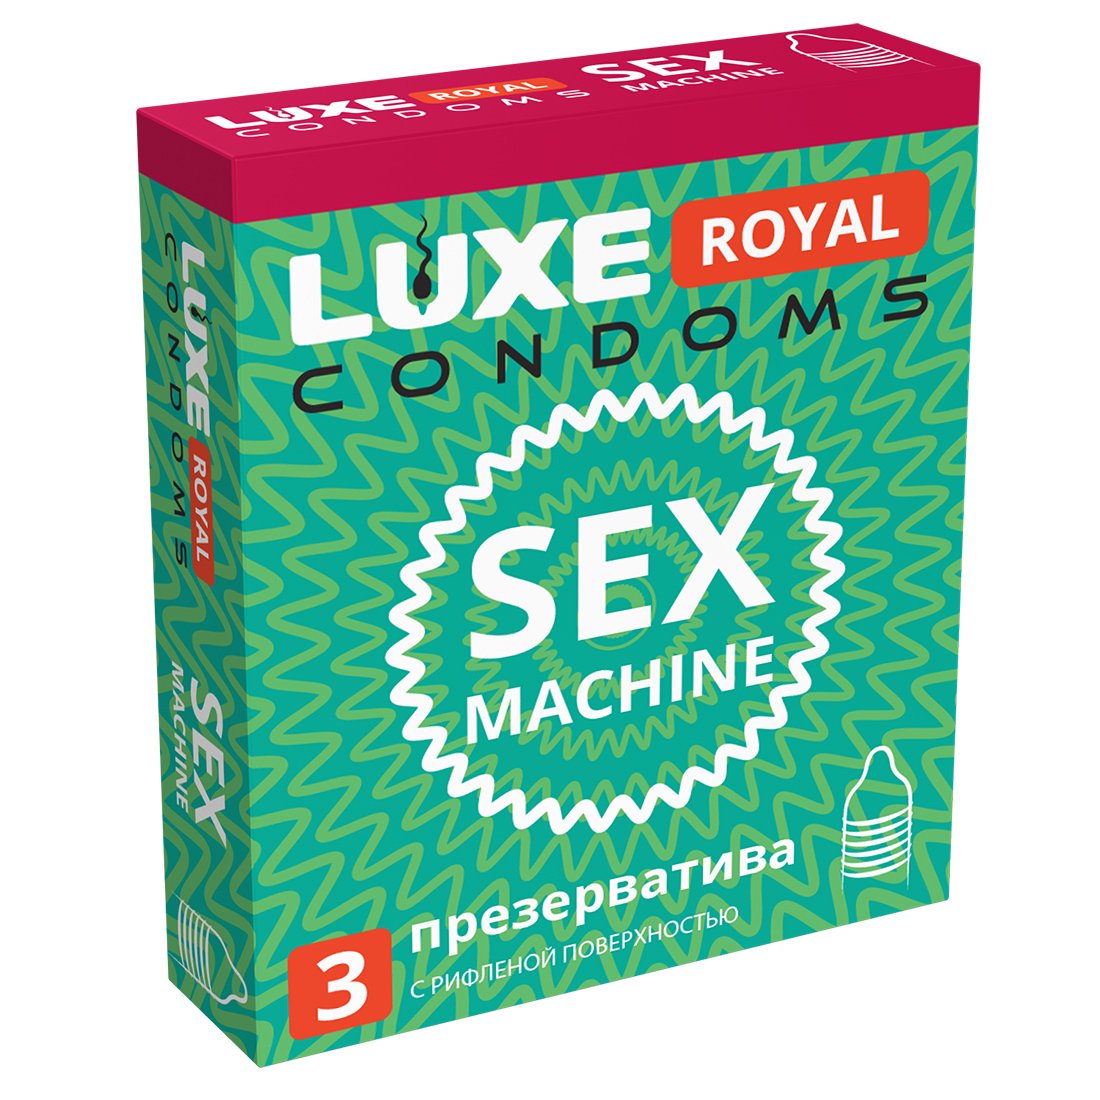  LUXE ROYAL SEX MACHINE    3 